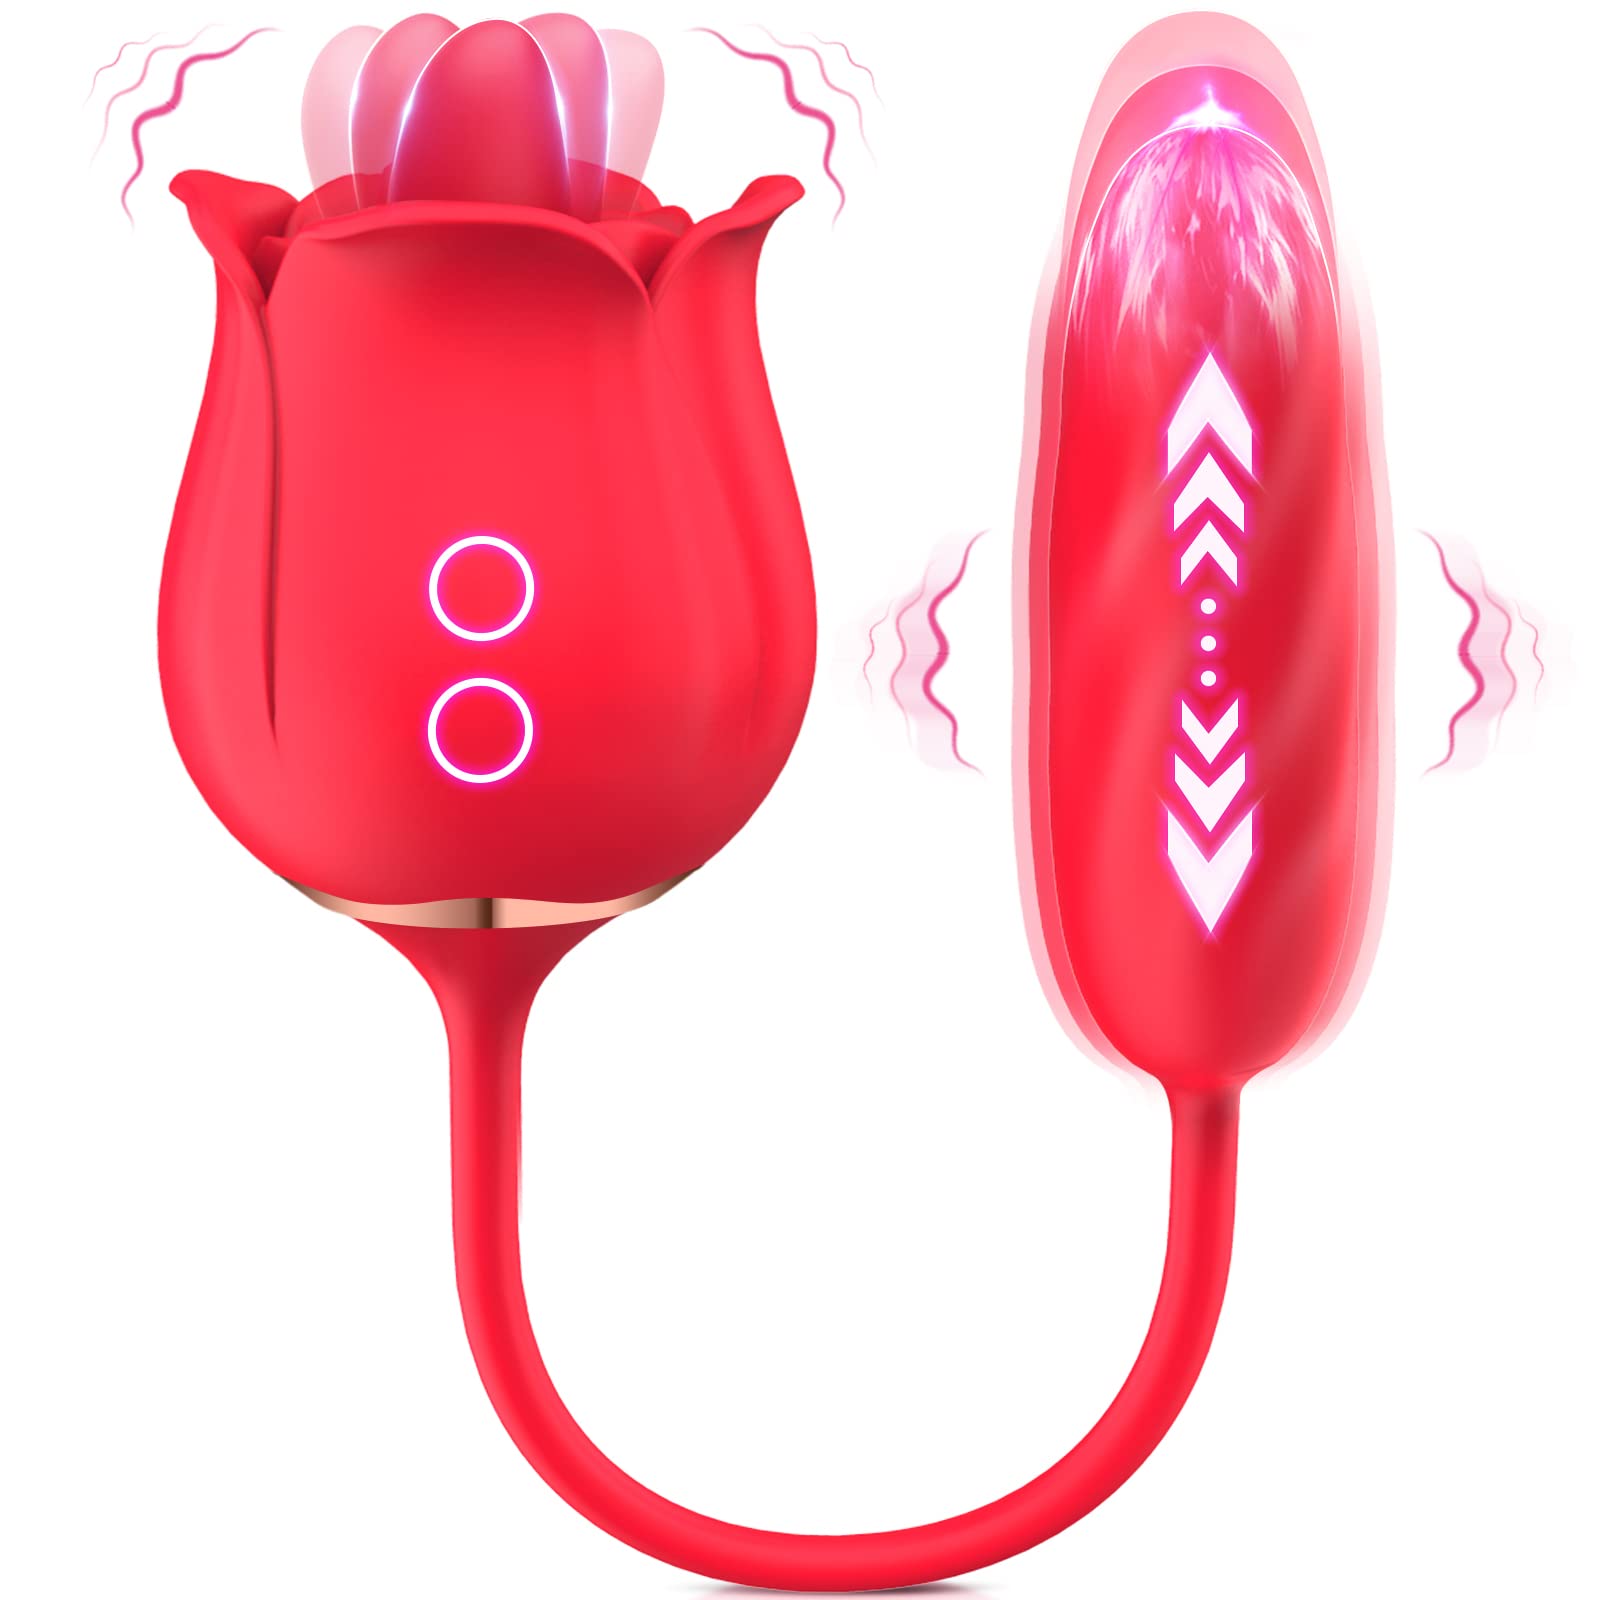 Rose Toy Vibrator for Women Tongue Licking Vibrator with Vibrating Egg